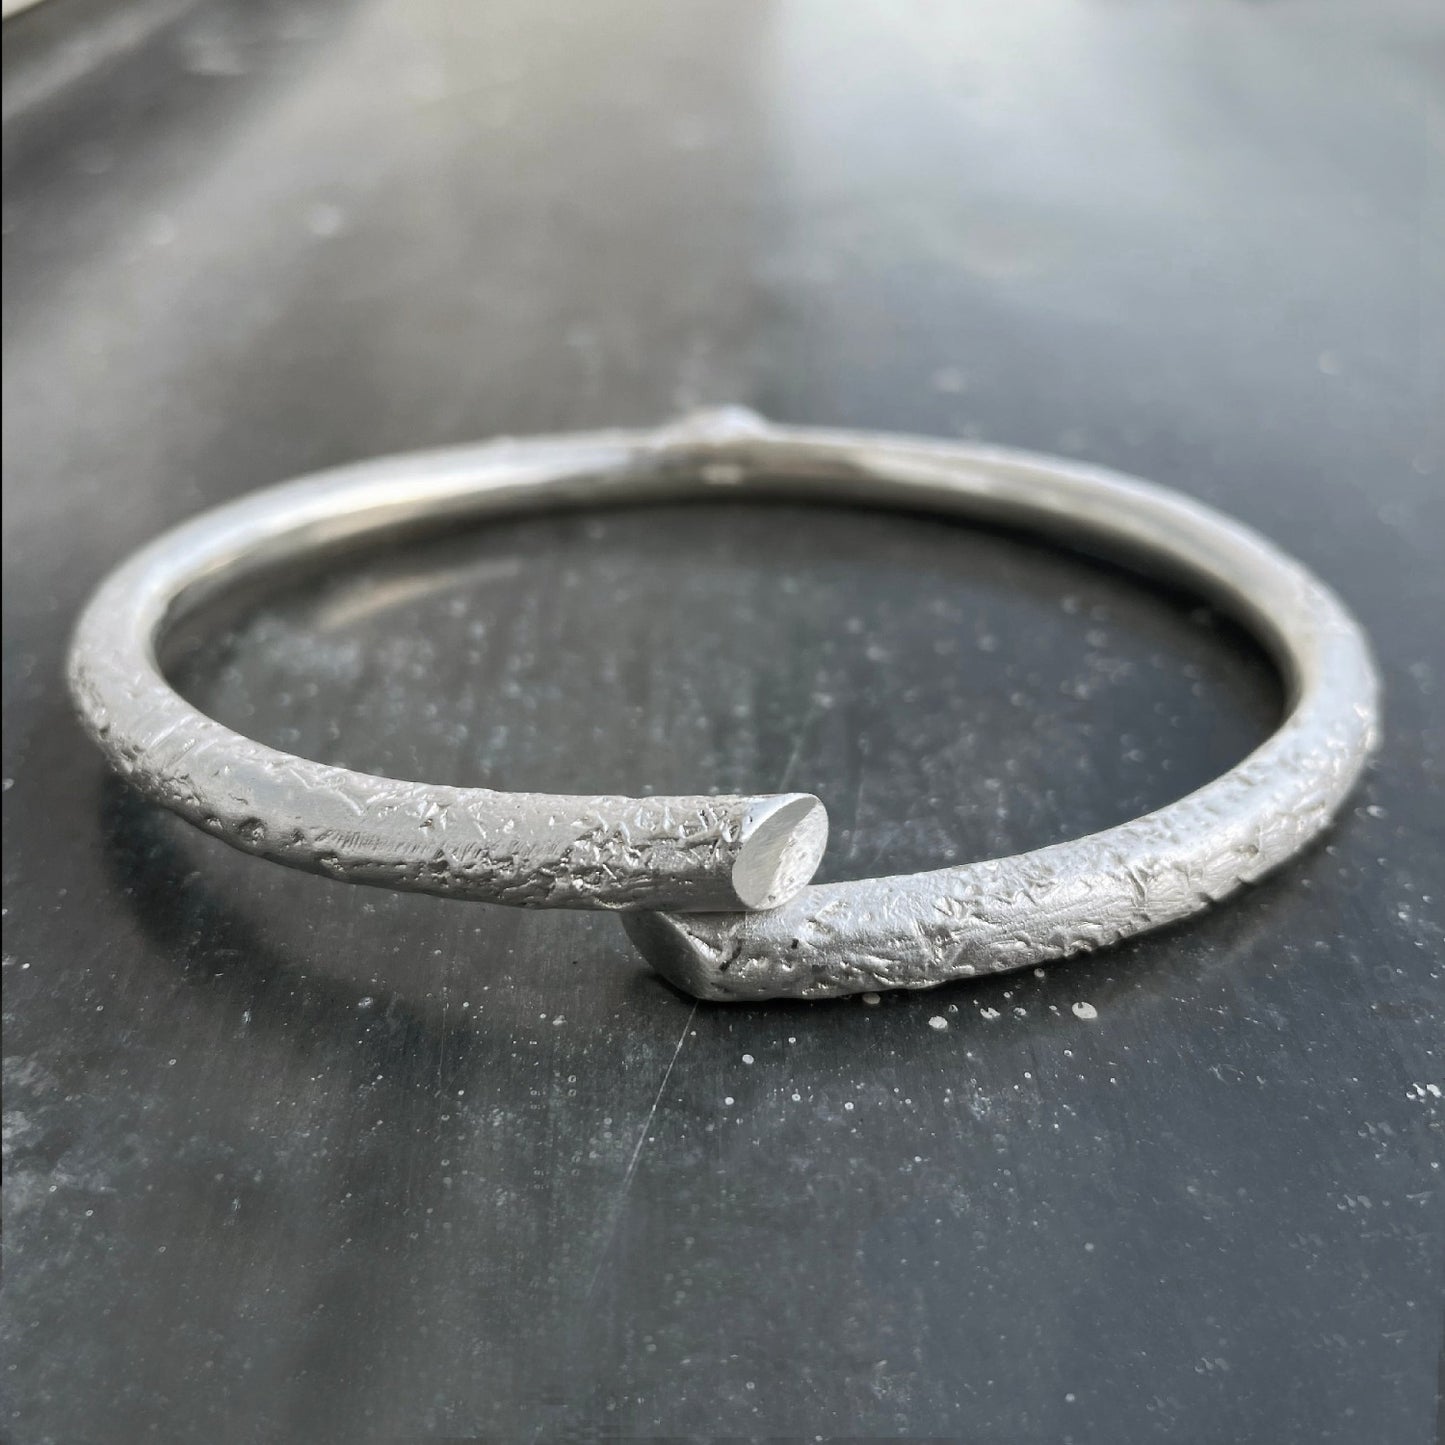 B1 bangle - Silver - with rough surface structure